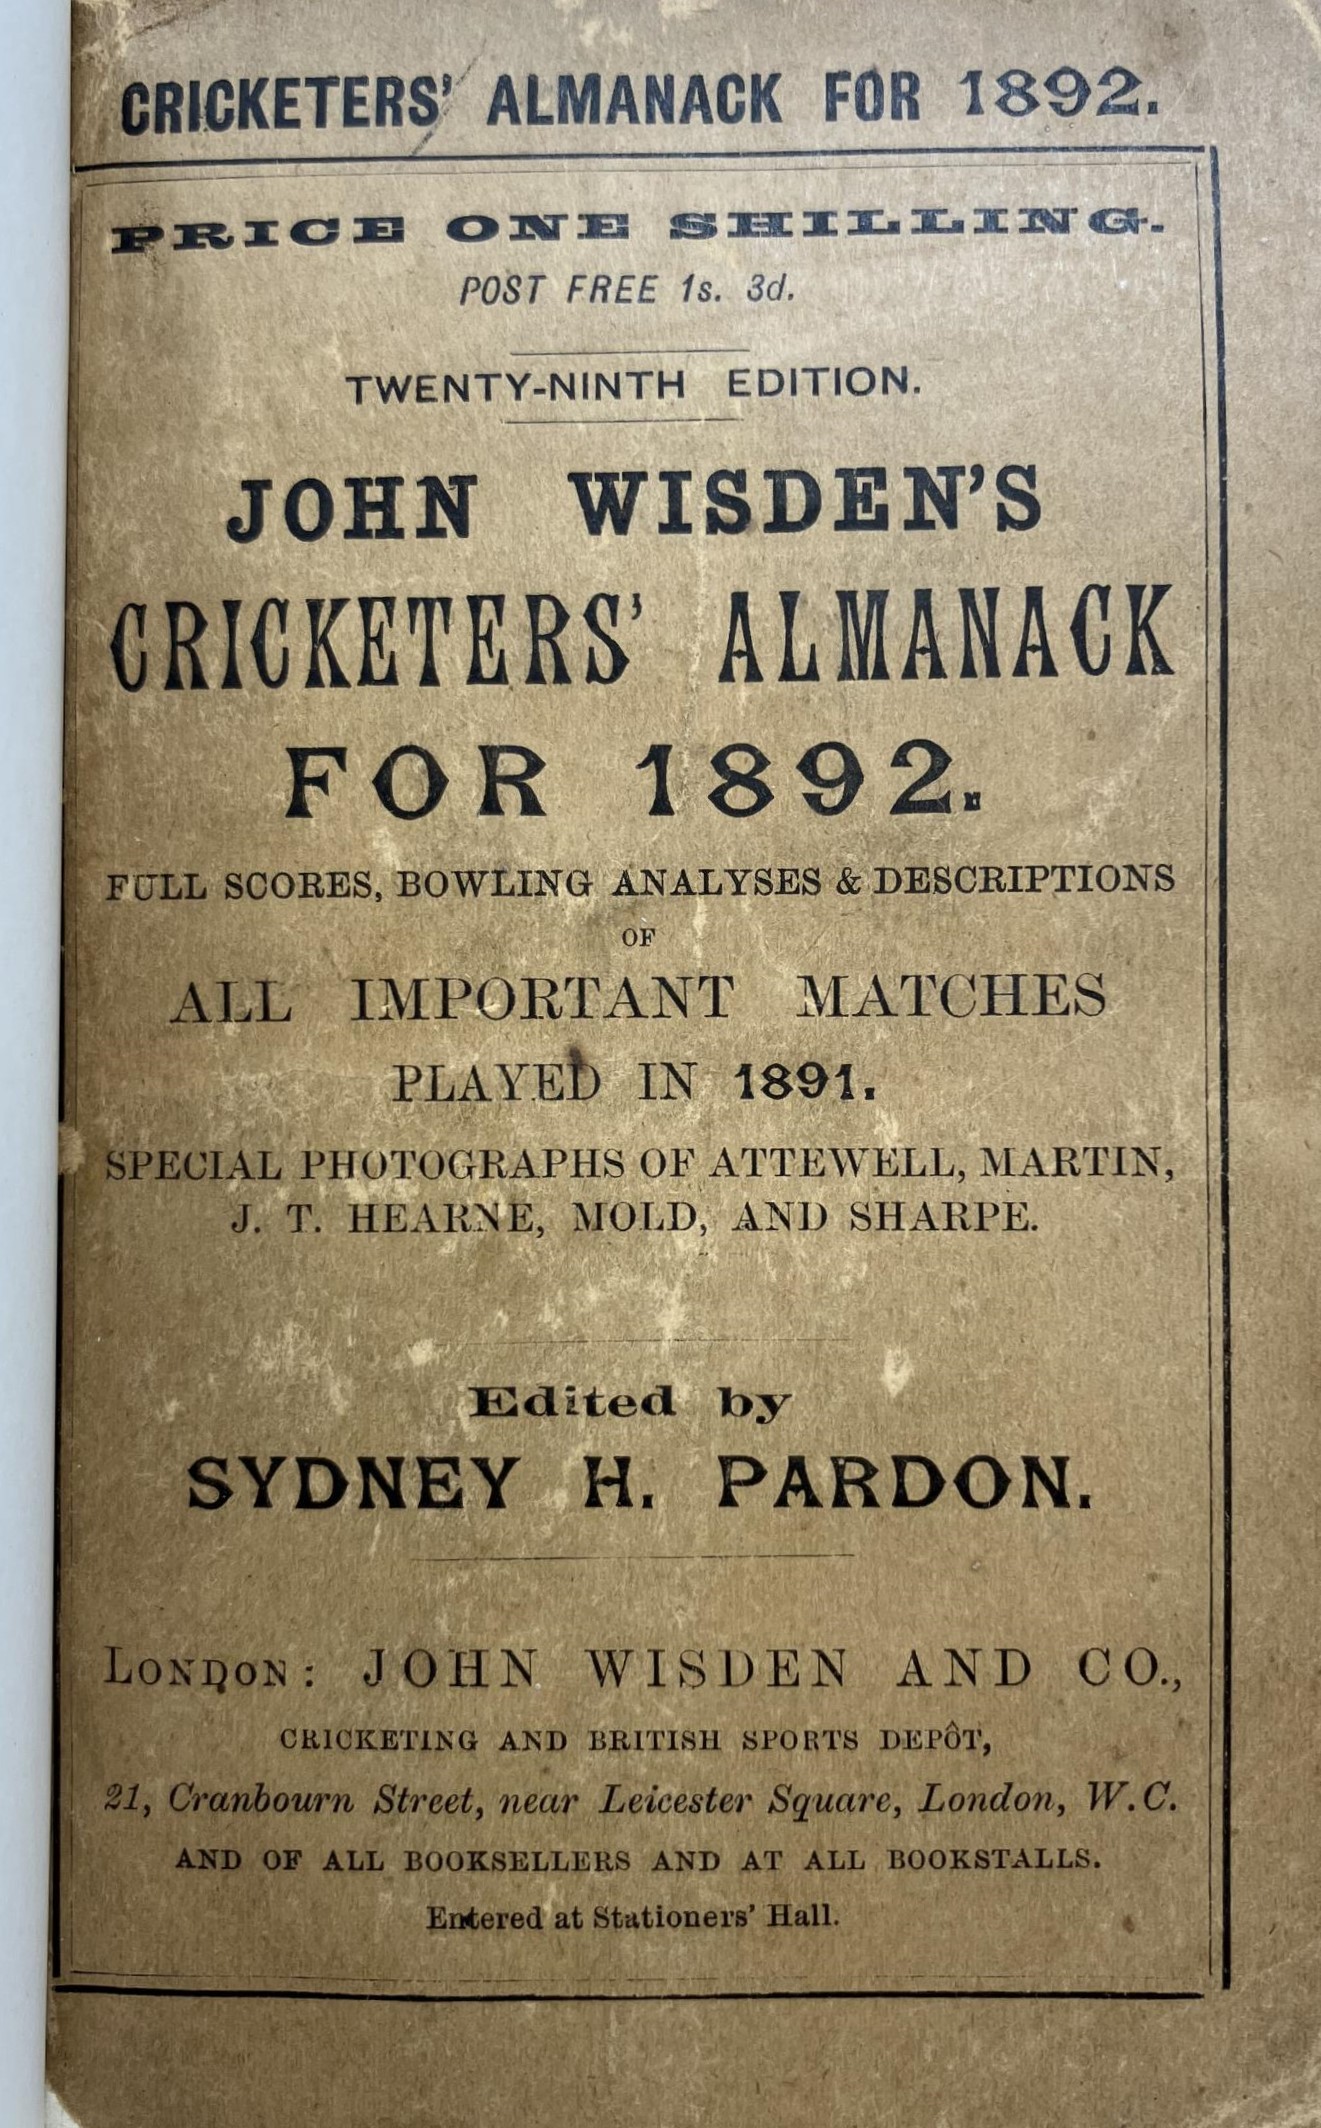 A Wisden Cricketers' Almanack, 1892 Provenance:  From the Harry Brewer Cricket Memorabilia - Image 3 of 4